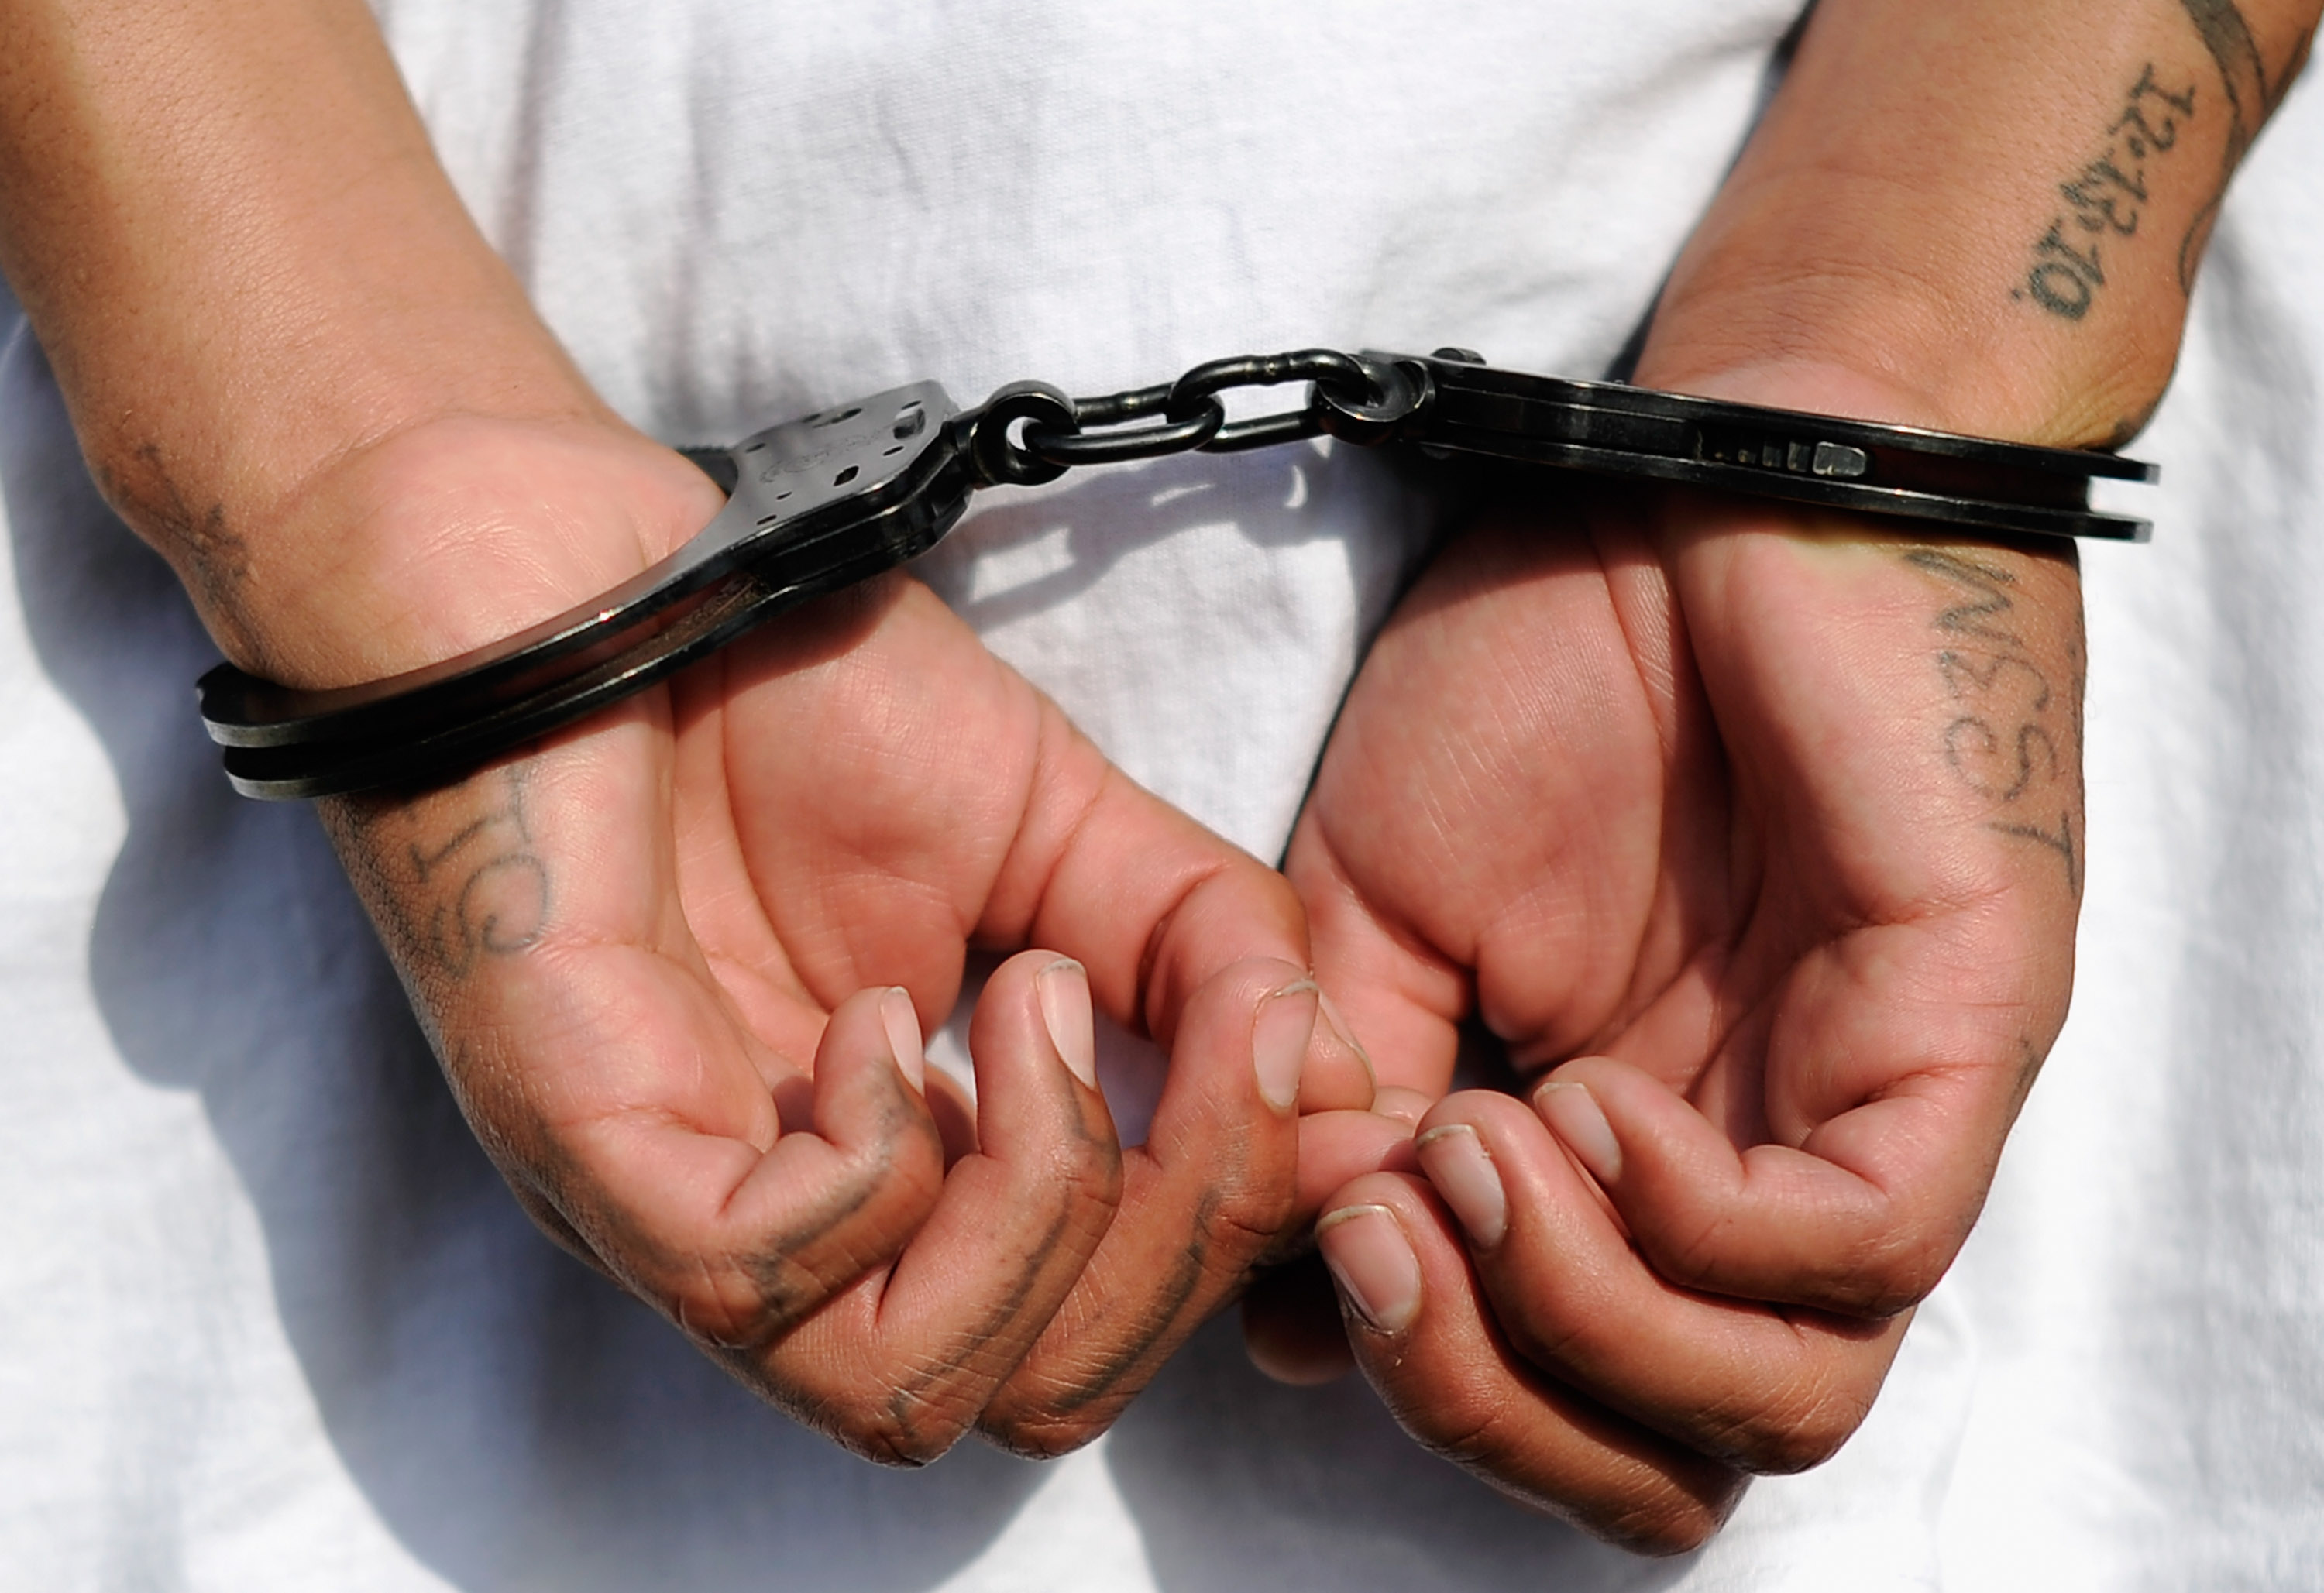 LOS ANGELES, CA - APRIL 29: Handcuffs are seen on the hands of a twenty-year old "Street Villains" gang member who was arrested by Los Angeles Police Department officers from the 77th Street division on April 29, 2012 in Los Angeles, California. The 77th Street division patrol the same neighborhood that truck driver Reginald Denny was nearly beaten to death by a group of black assailants at the intersection of Florence and Normandie Avenues. It’s been 20 years since the verdict was handed down in the Rodney King case that sparked infamous Los Angeles riots. (Photo by Kevork Djansezian/Getty Images)